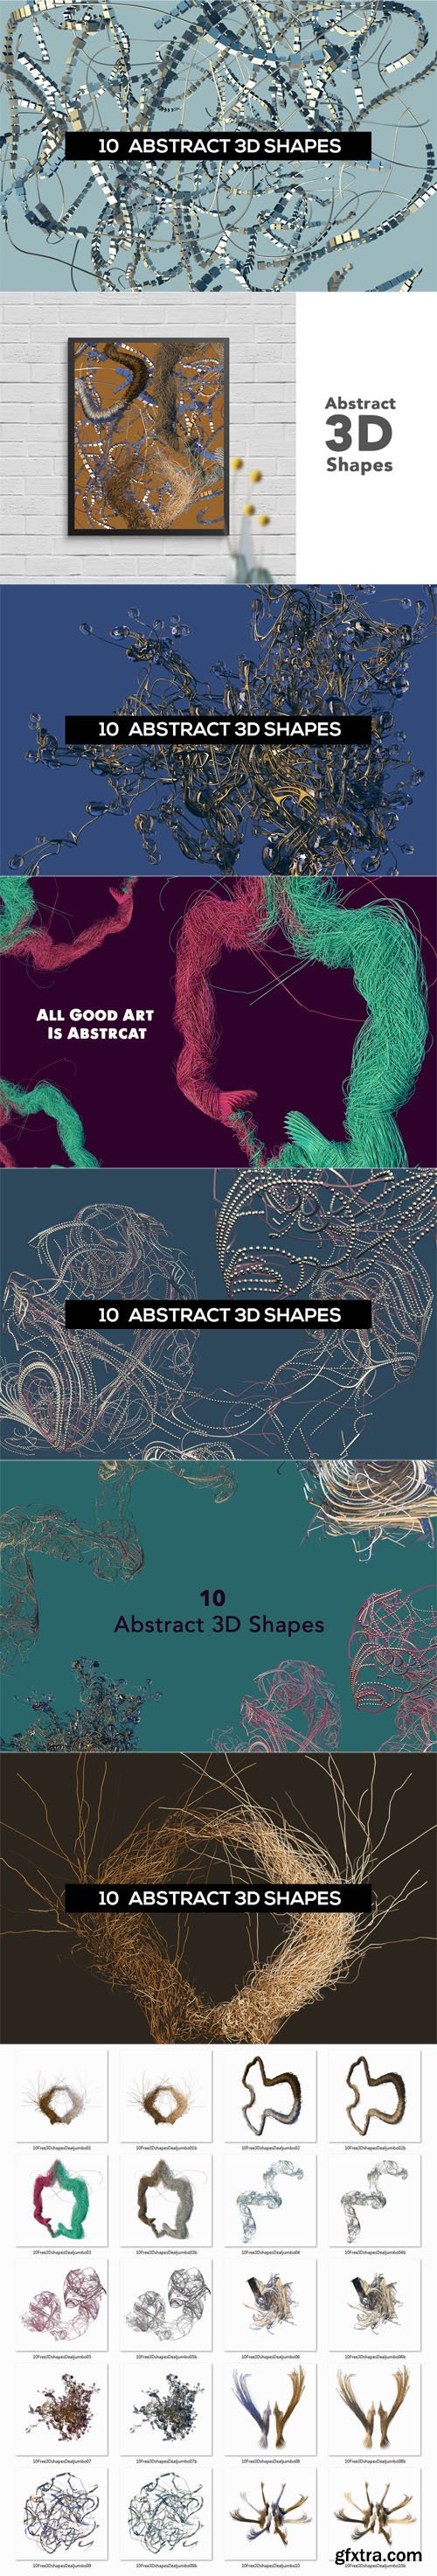 10 Abstract Futuristic 3D Shapes